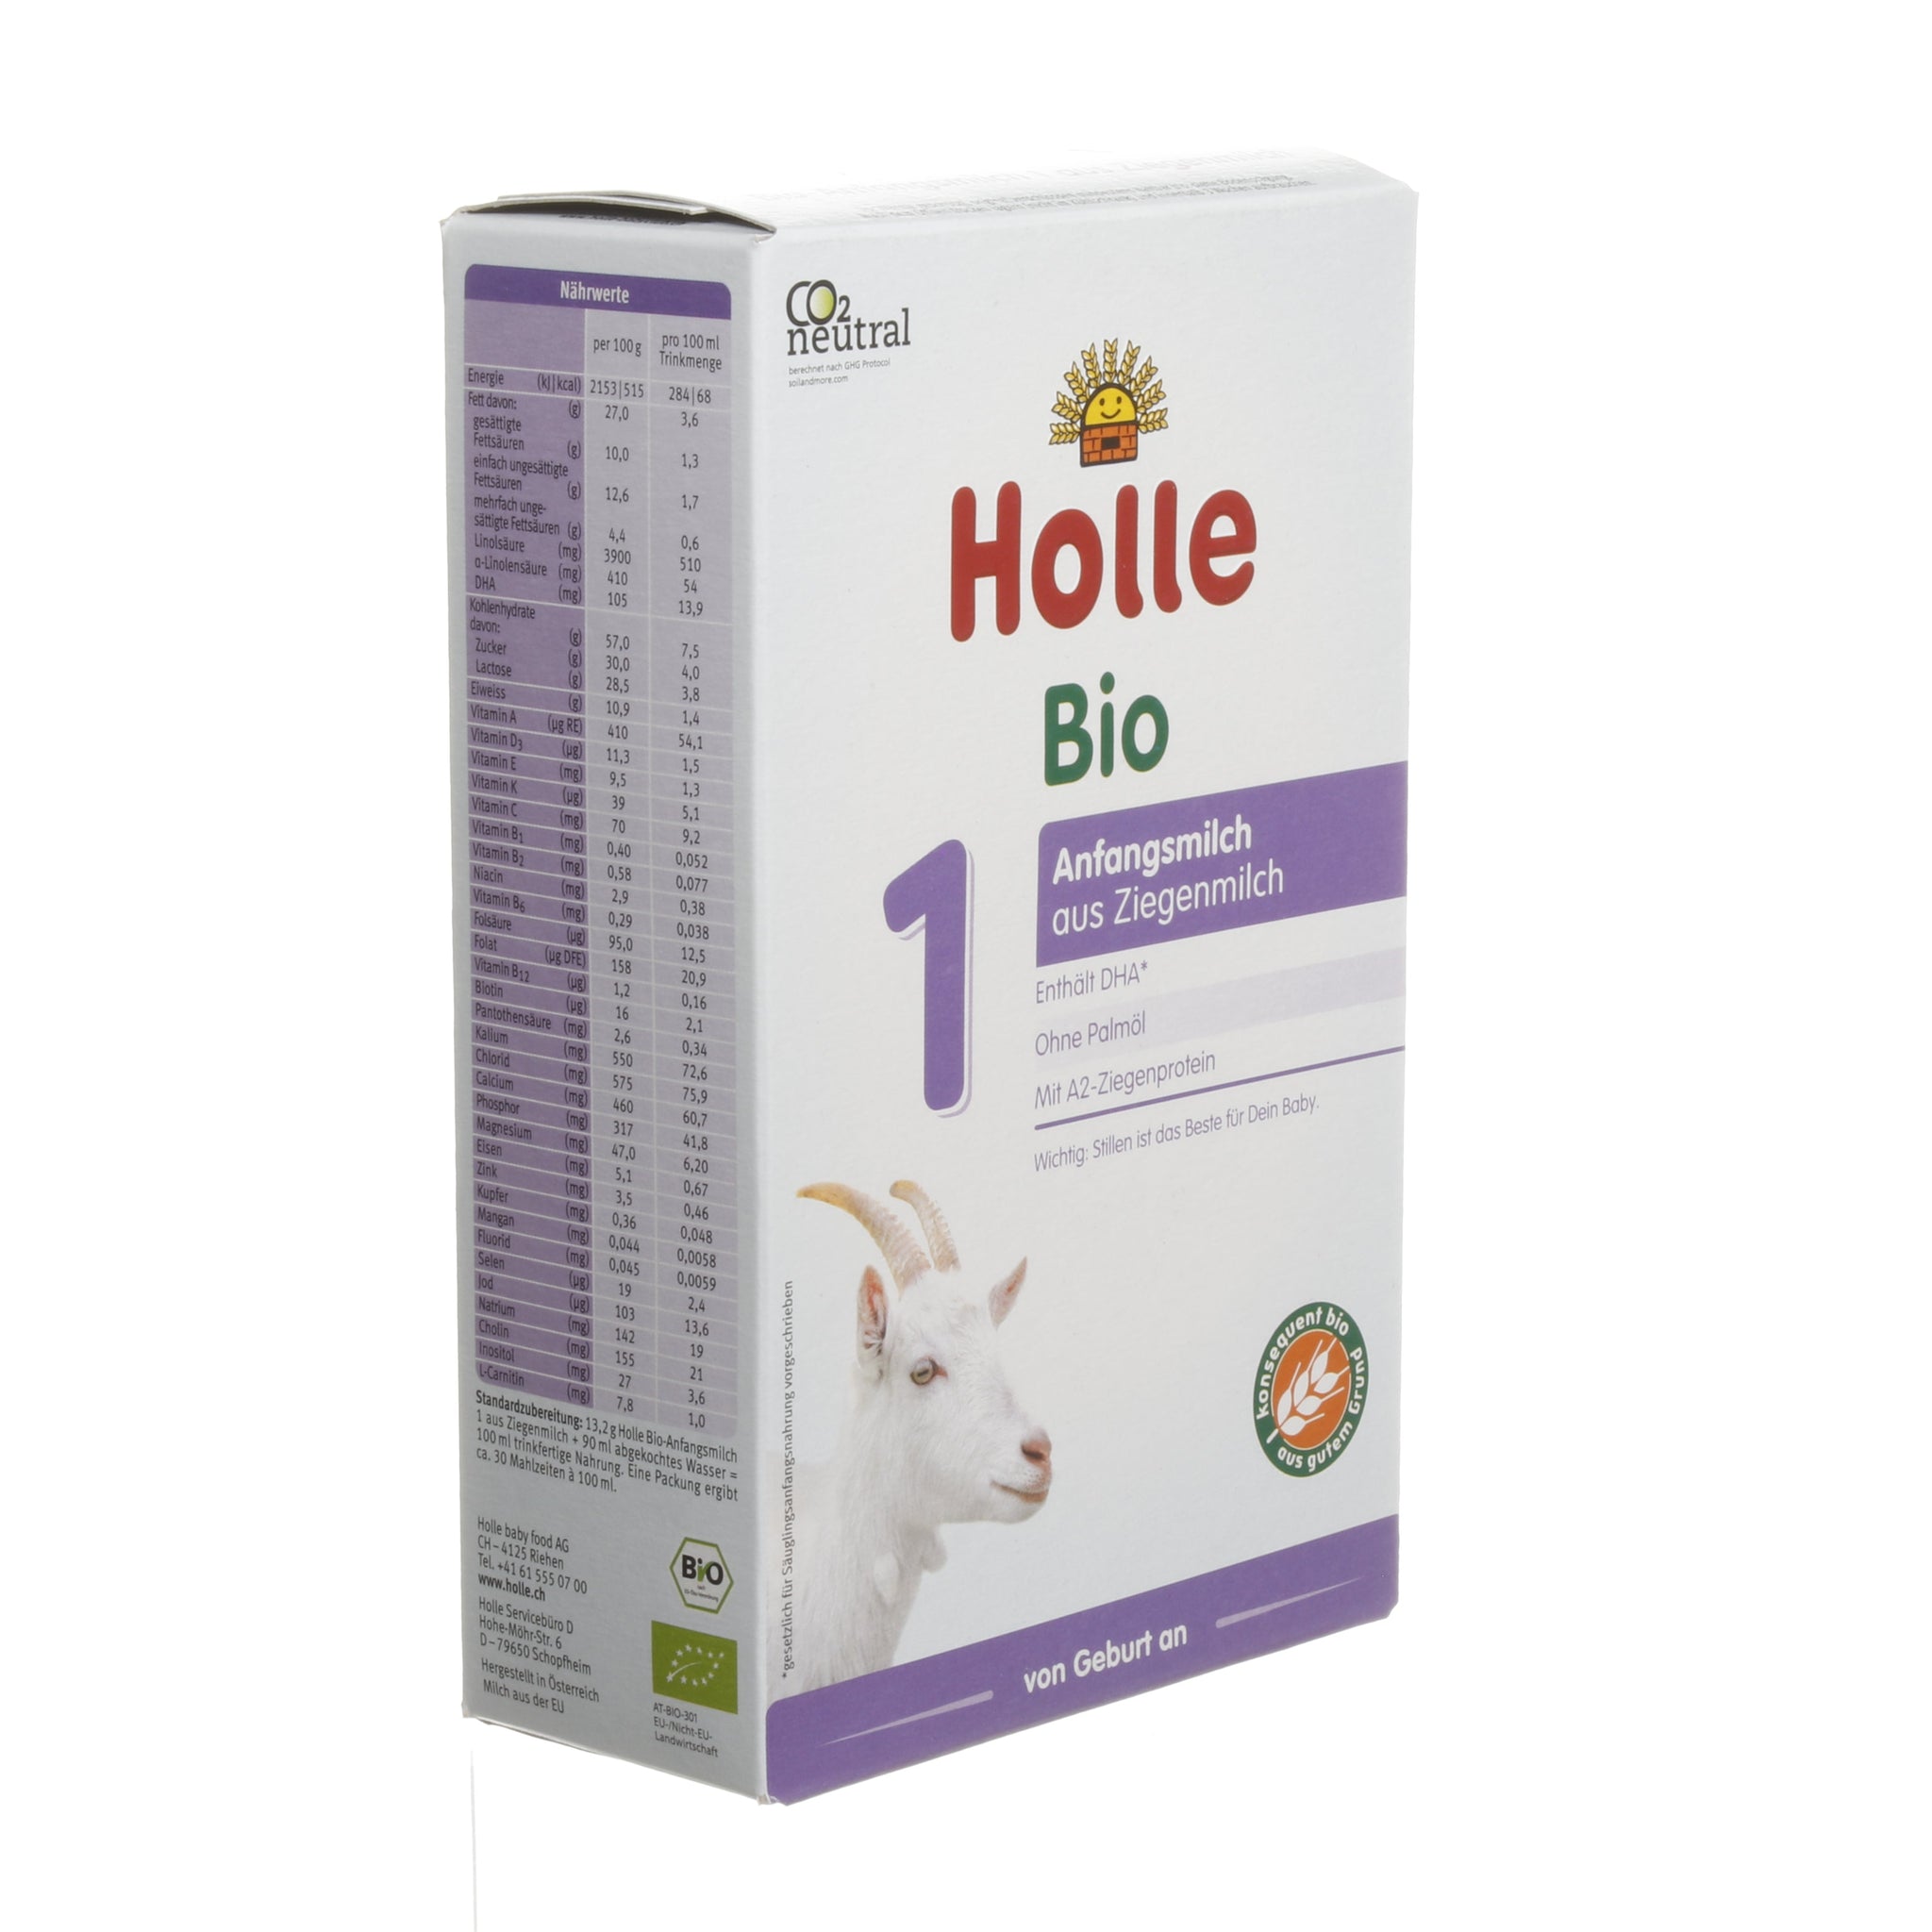 12 x Holle Organic Infant Formula 1 Made from Goat's Milk, 400g - firstorganicbaby